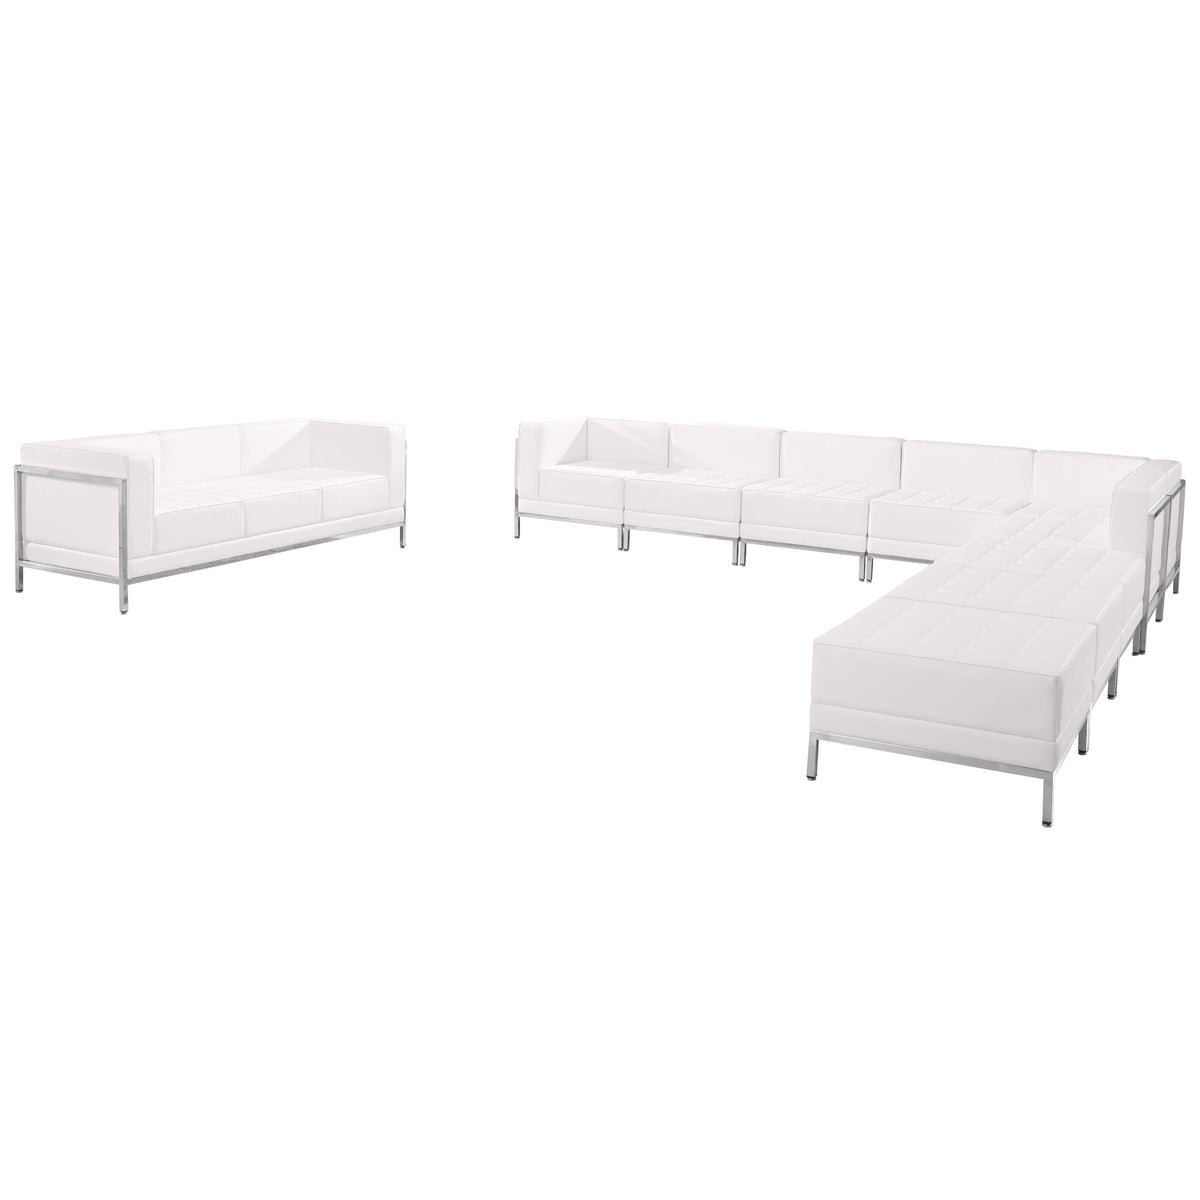 Melrose White |#| 10 Piece White LeatherSoft Modular Sectional & Sofa Set - Stainless Steel Legs